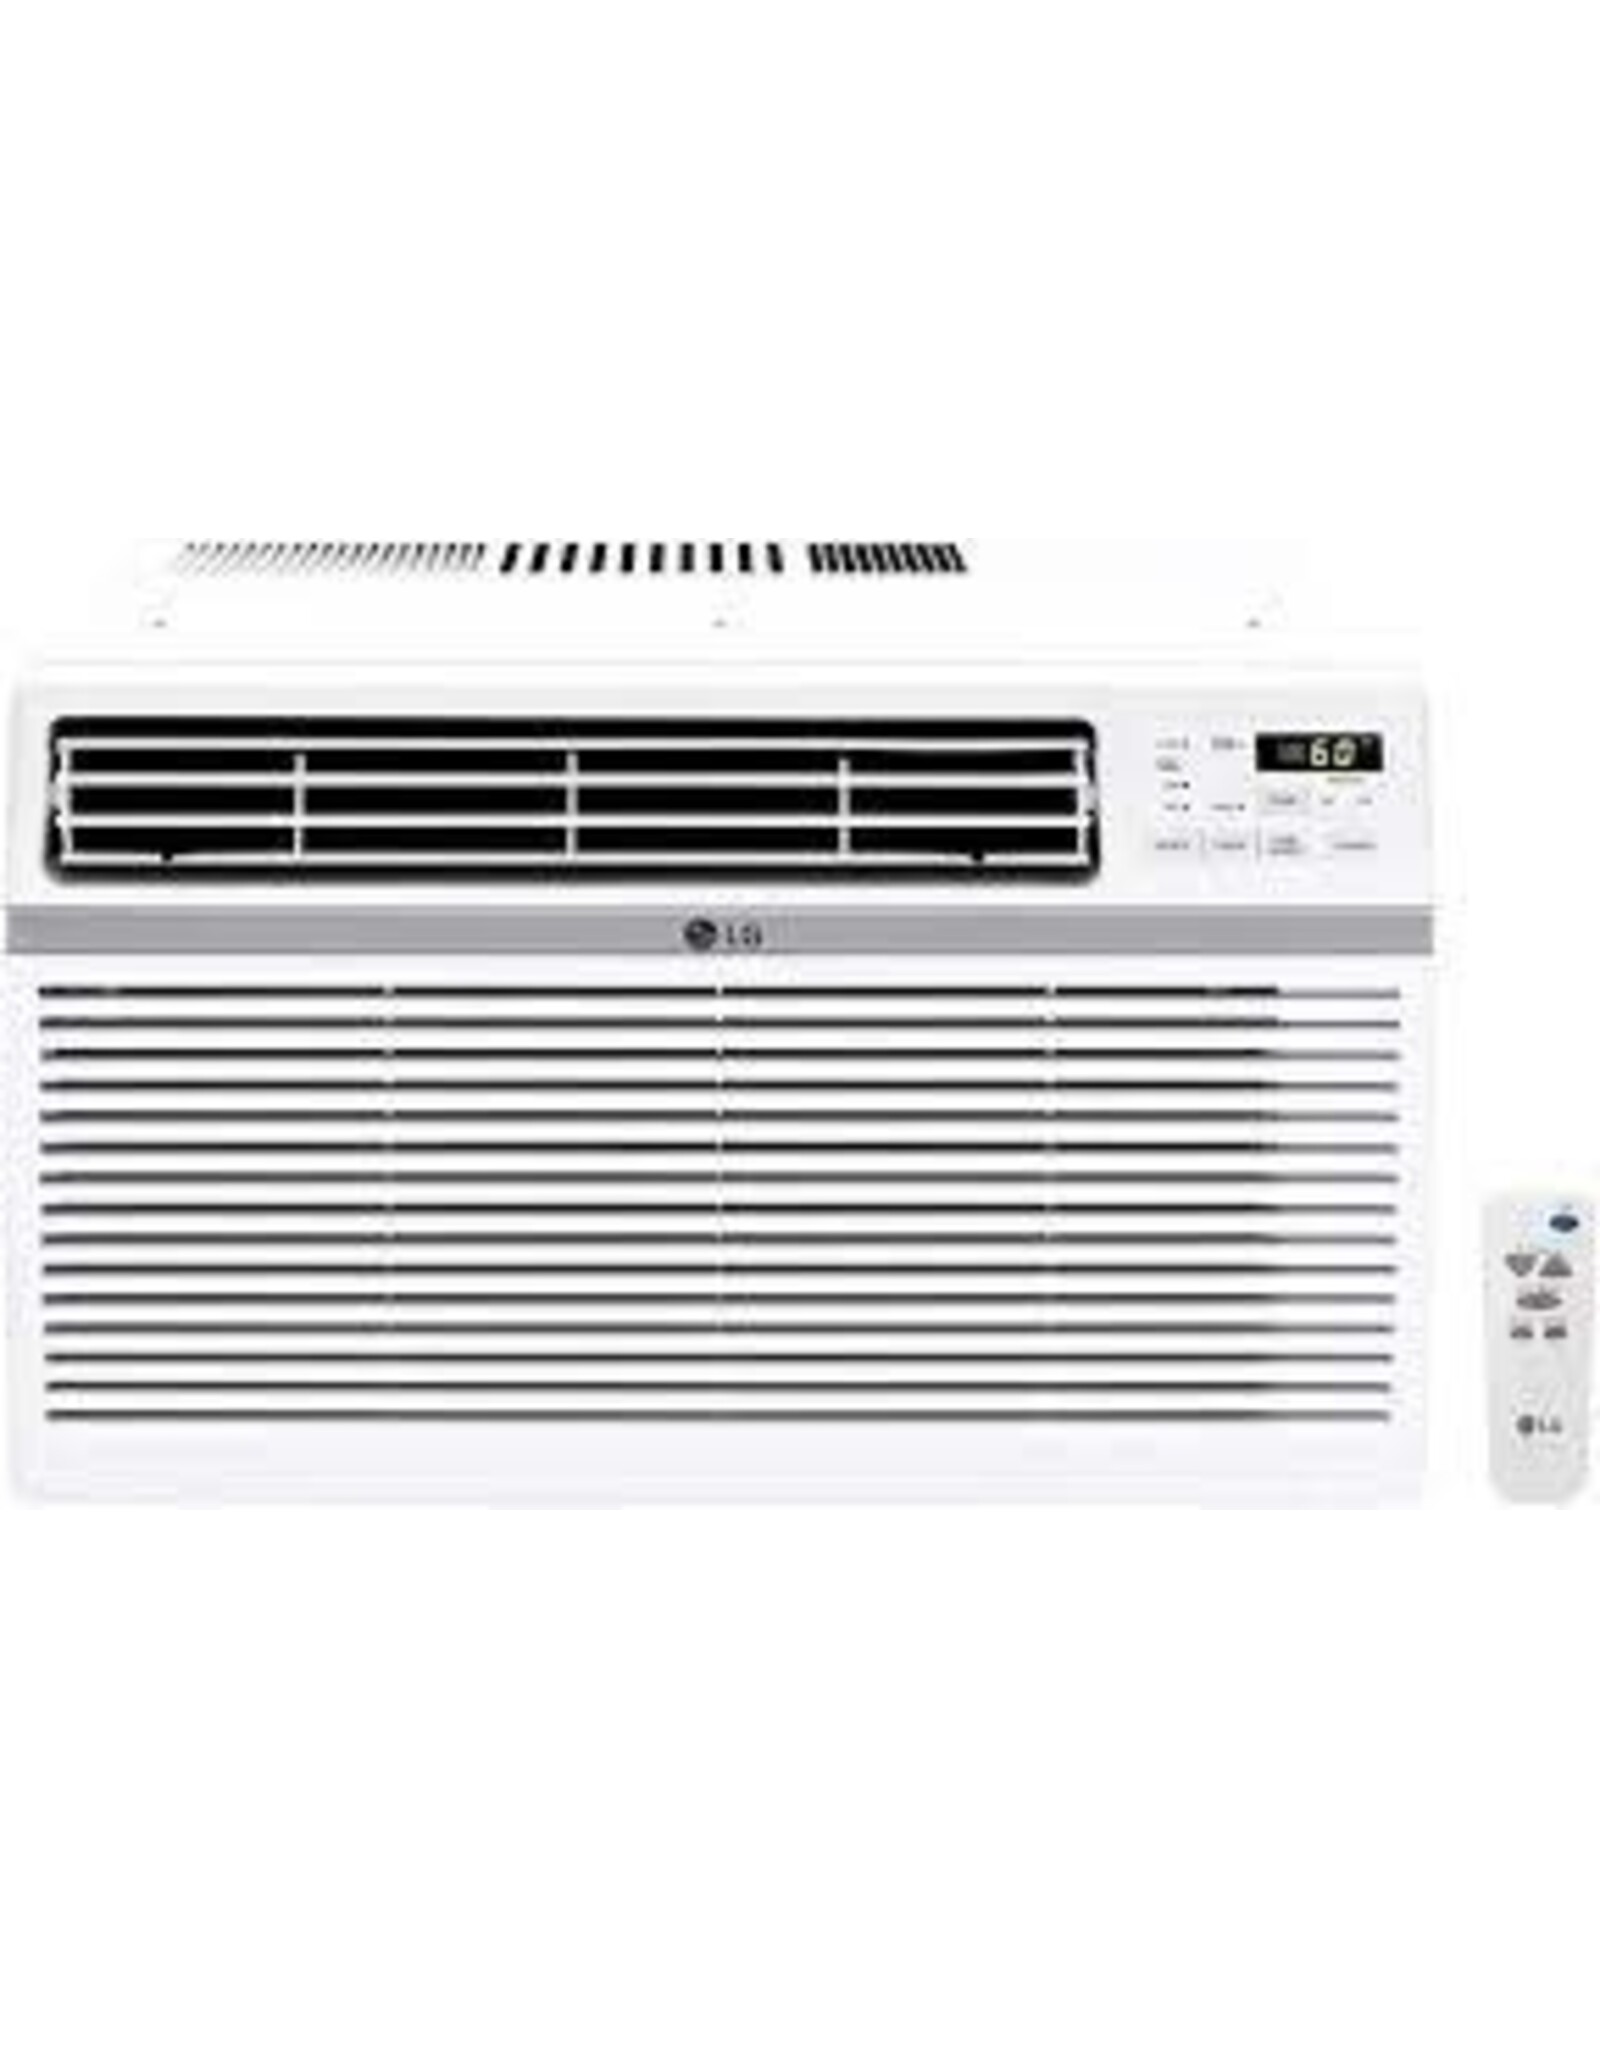 lg LG 12,000 BTU 115-Volt Window Air Conditioner LW1216ER Cools 550 Sq. Ft. with ENERGY STAR and Remote